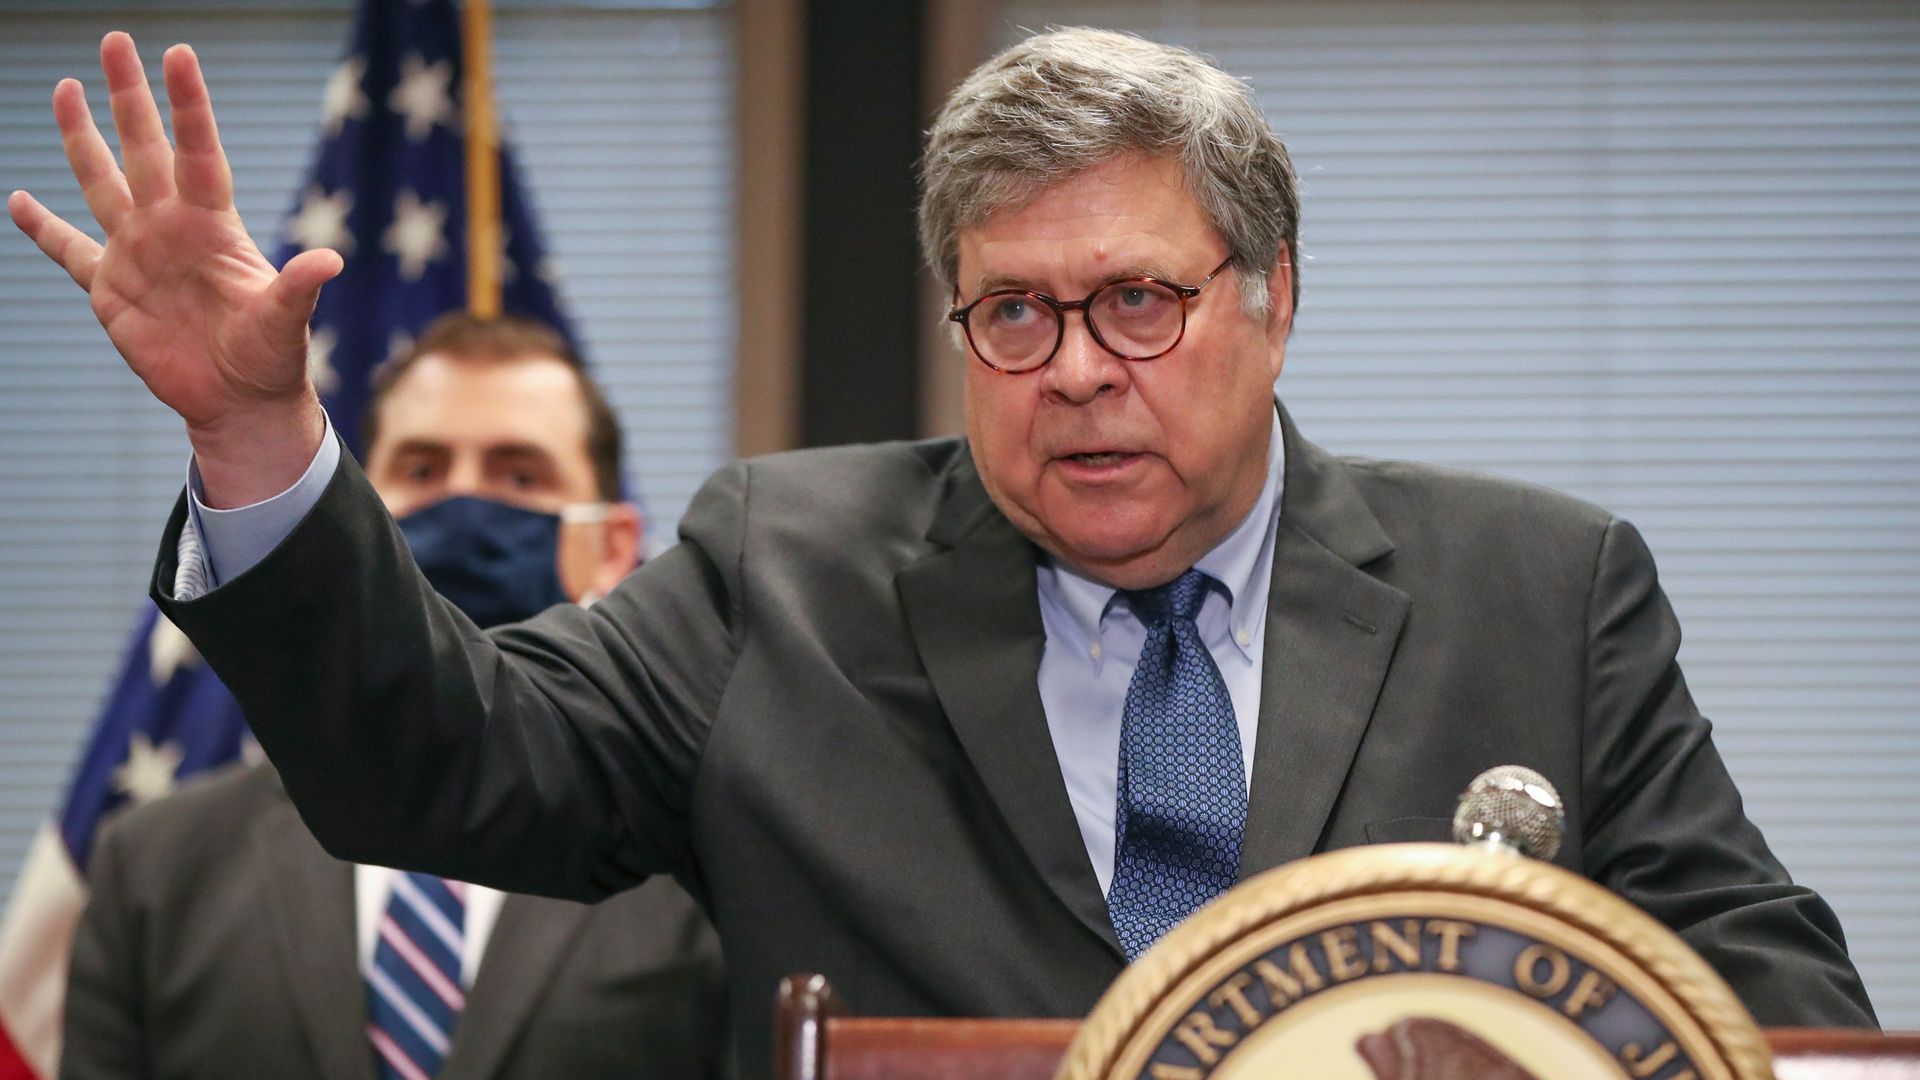 Barr stands with a raised hand behind a podium